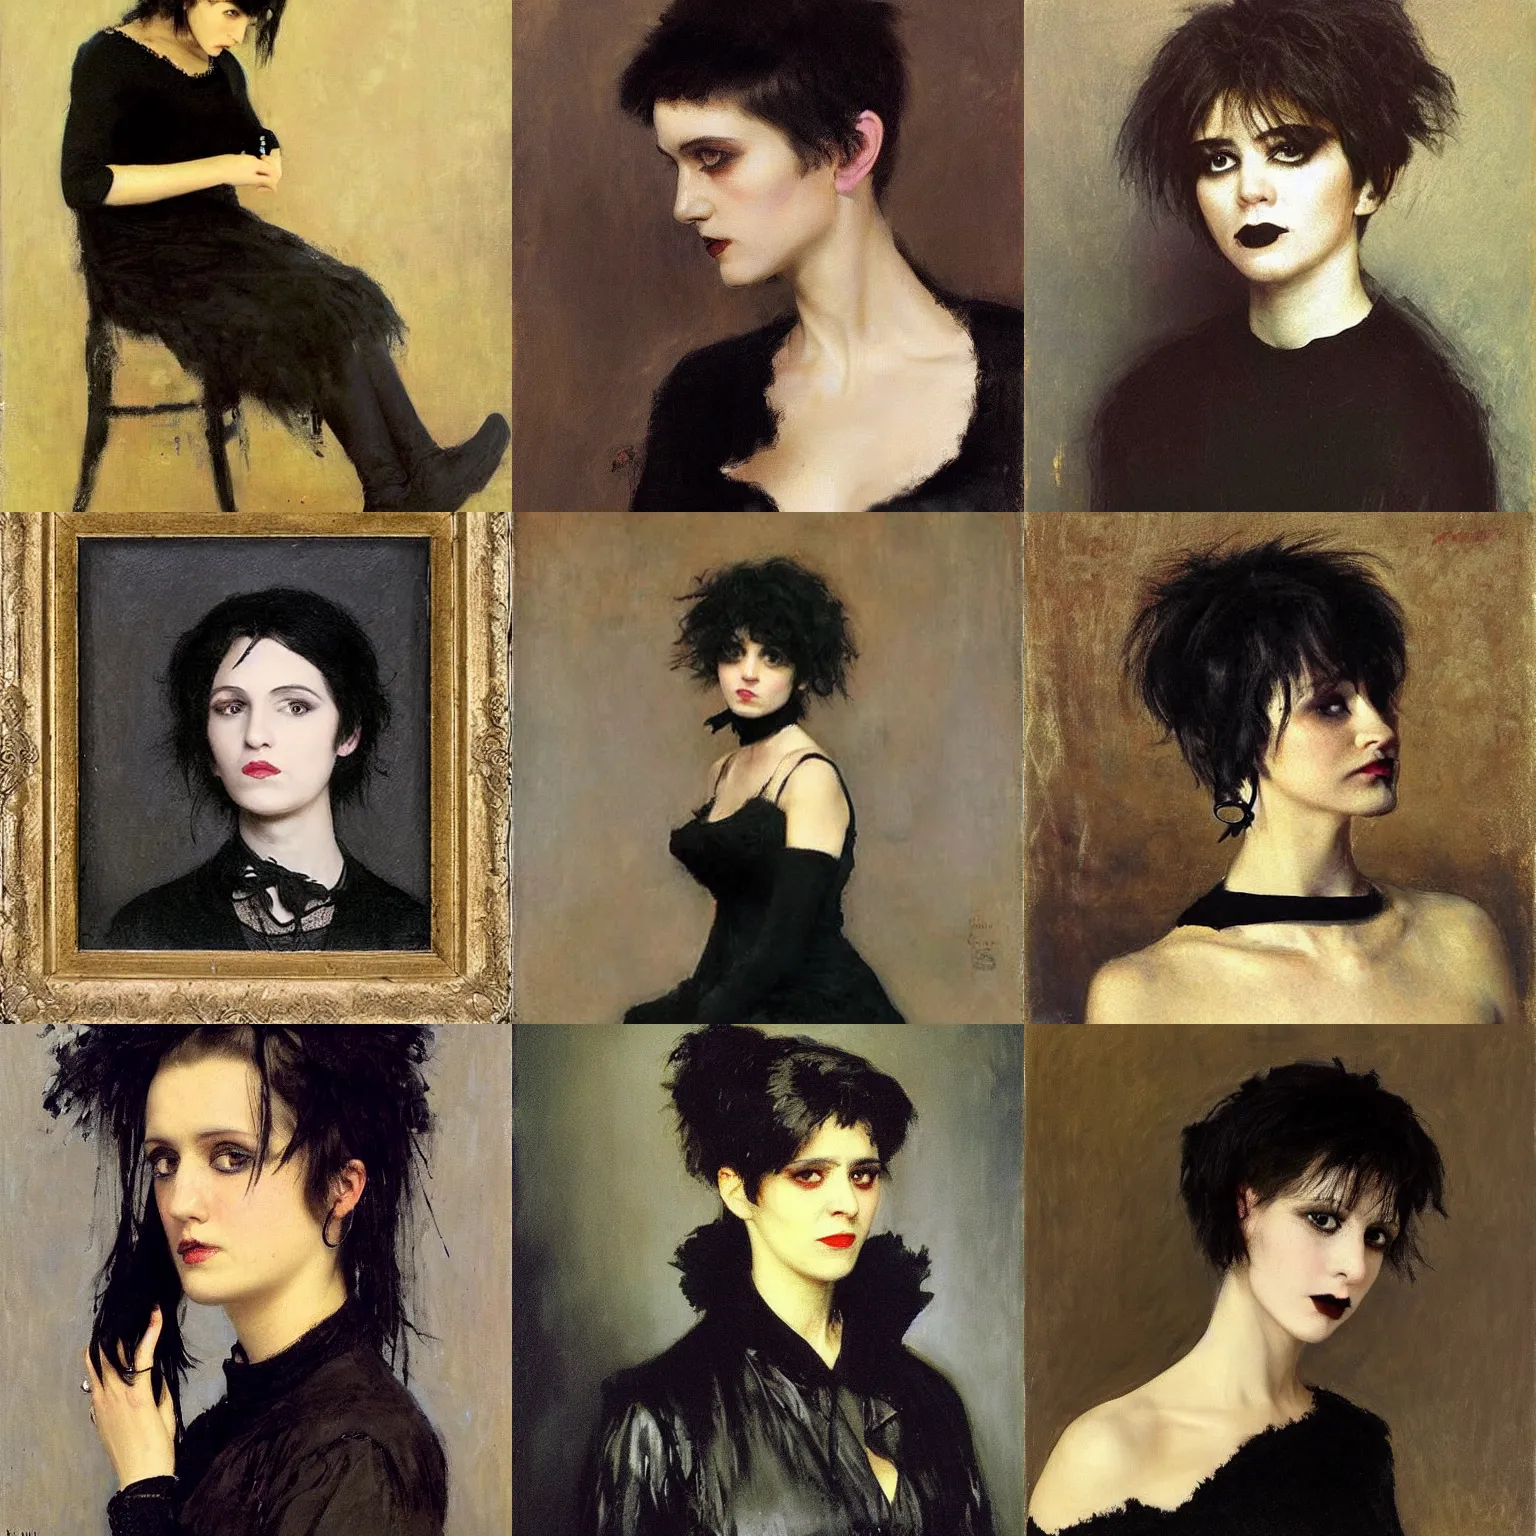 Prompt: A goth painted by Ilya Repin. Her hair is dark brown and cut into a short, messy pixie cut. She has a slightly rounded face, with a pointed chin, large entirely-black eyes, and a small nose. She is wearing a black tank top, a black leather jacket, a black knee-length skirt, a black choker, and black leather boots.